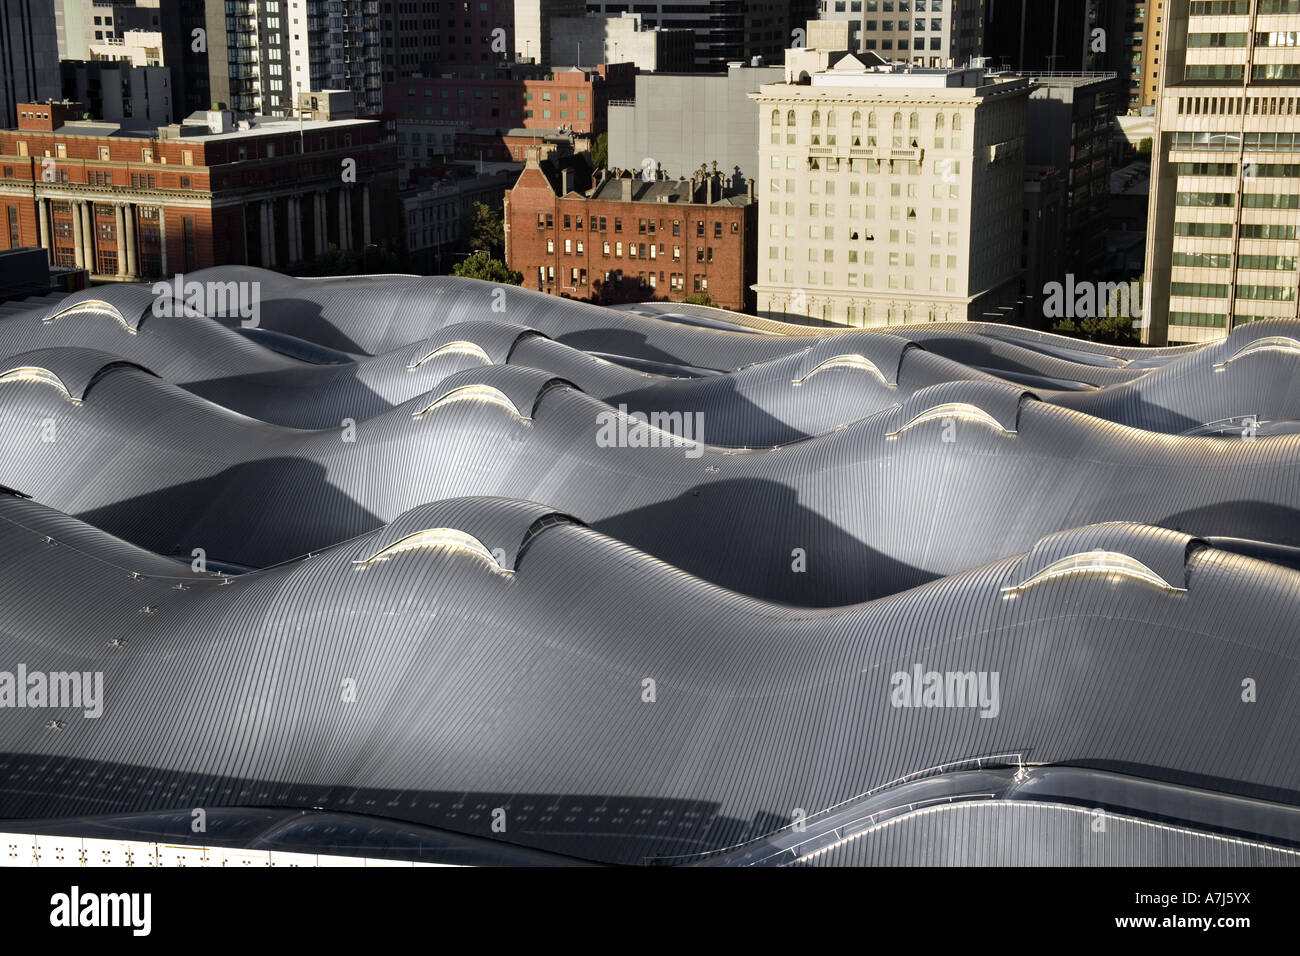 Southern Cross Station roof, formerly Spencer Street Station, Melbourne Architect: Grimshaw Architects Stock Photo